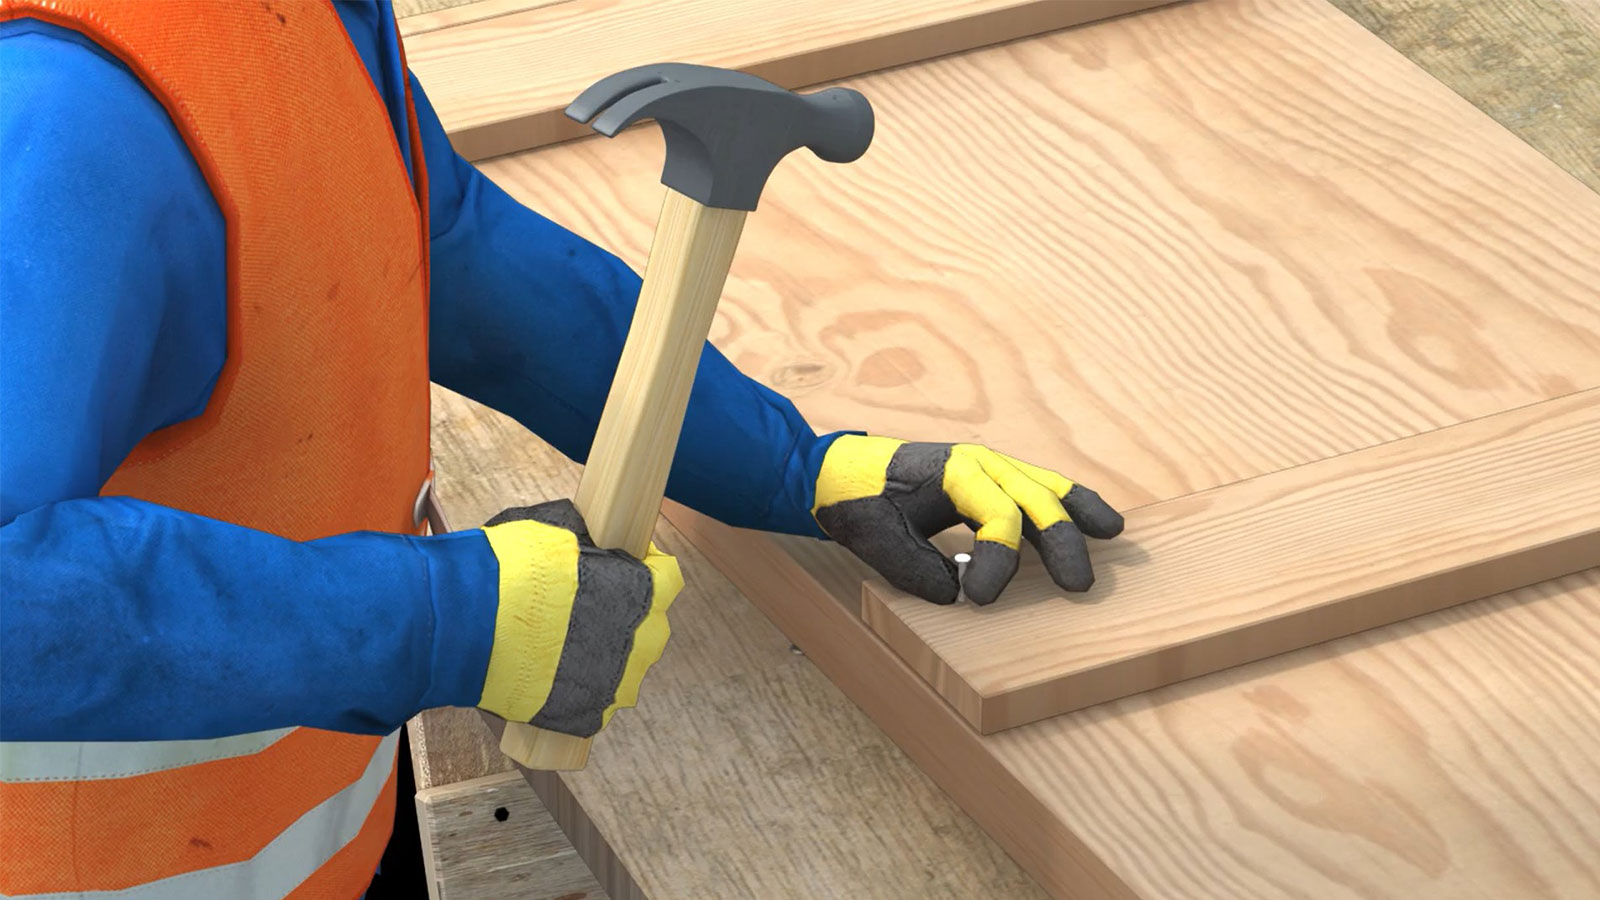 Hand and Power Tools - Construction Worksite Safety